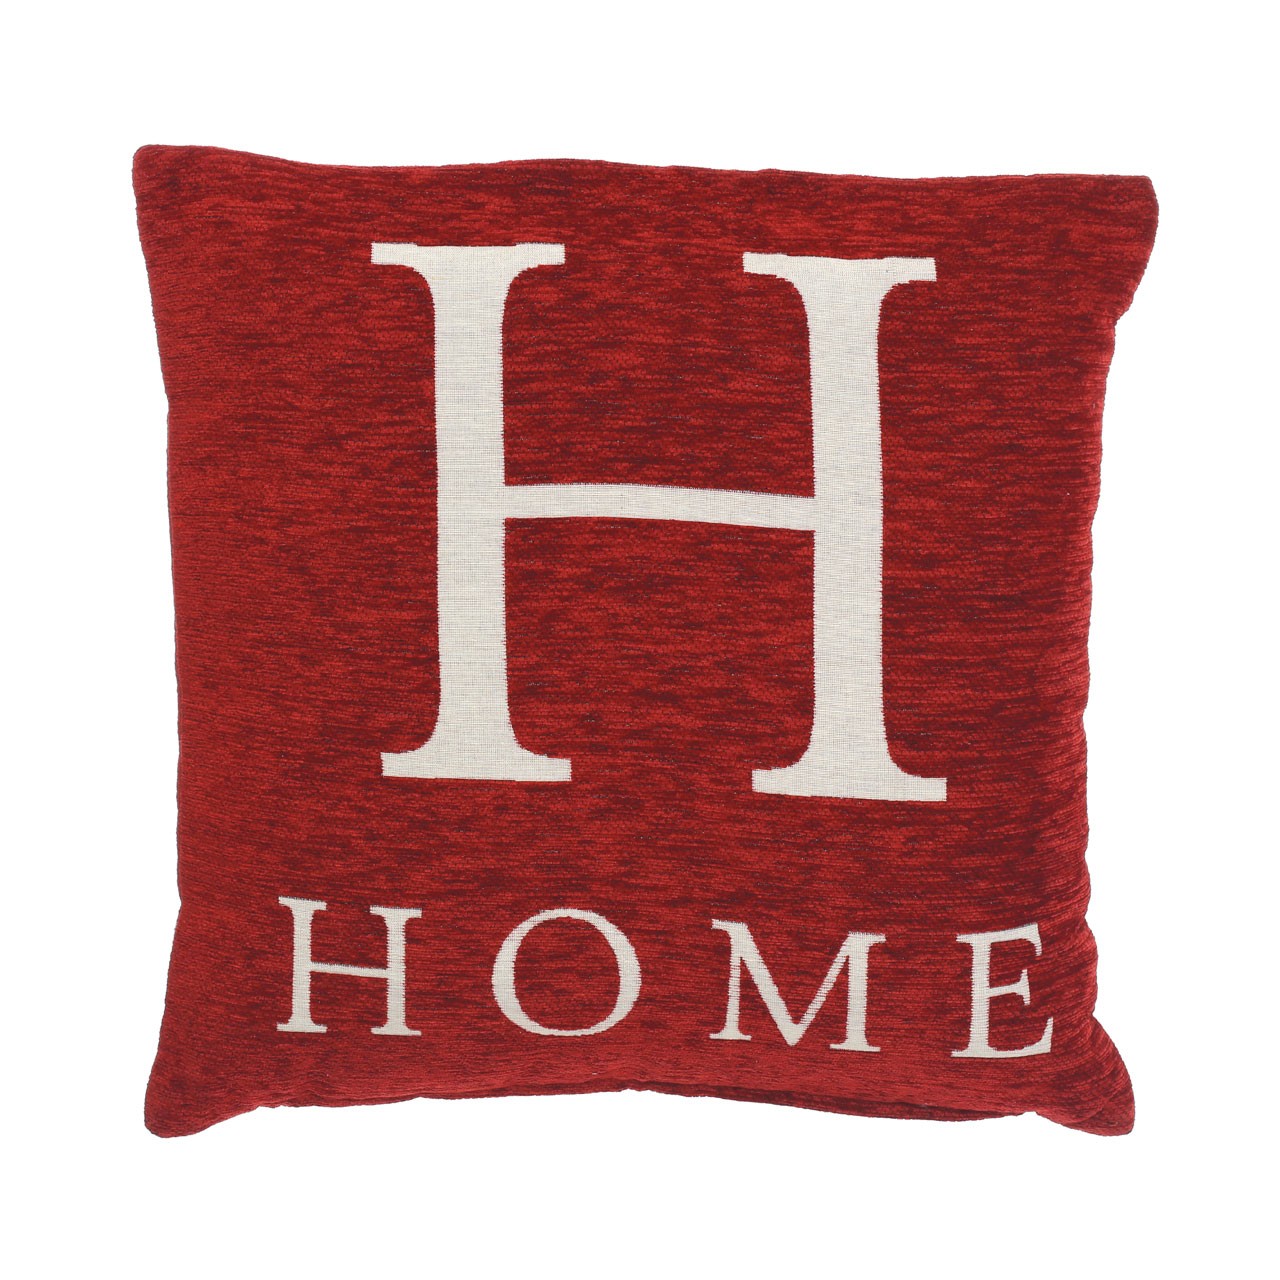 Prime Furnishing "Home" Chenille Cushion - Red